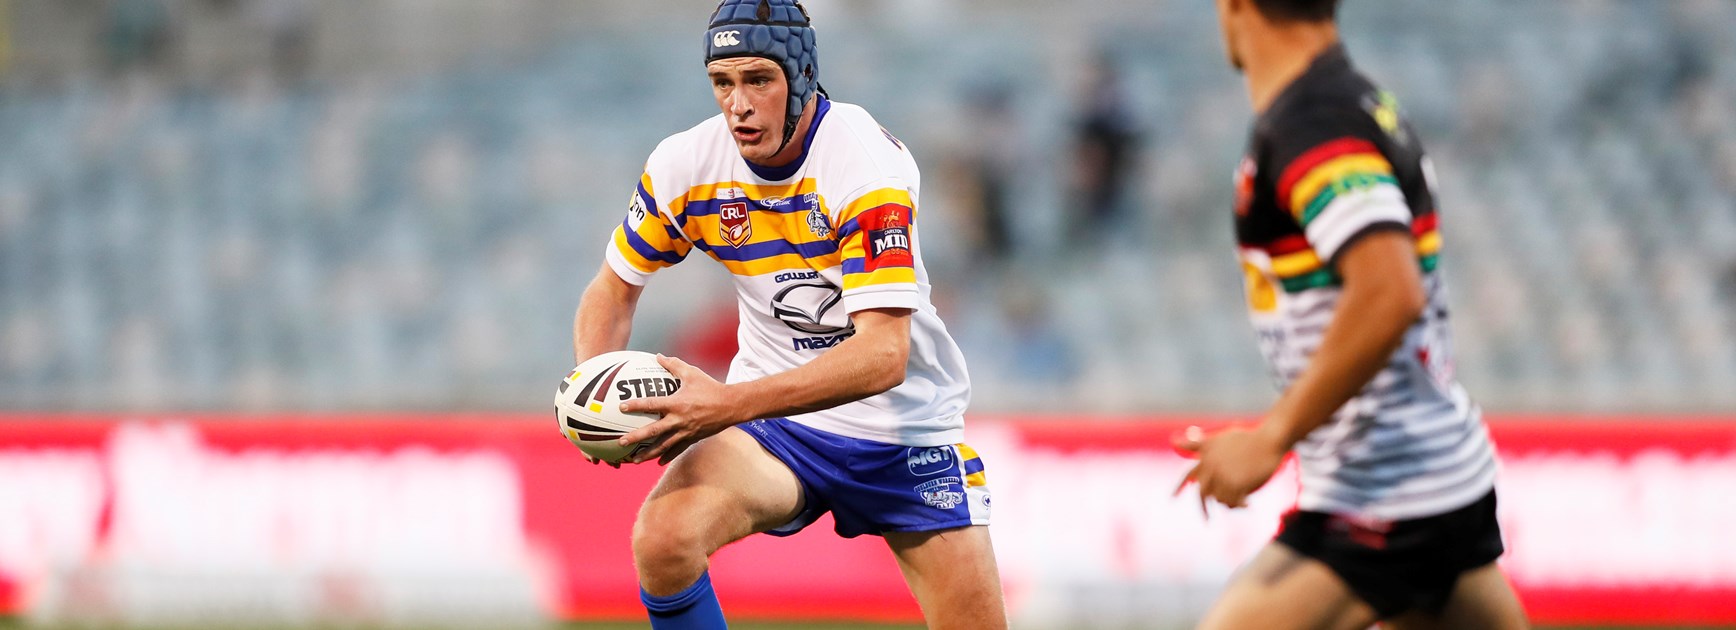 Austbrokers Canberra Raiders Cup Round 4 Preview